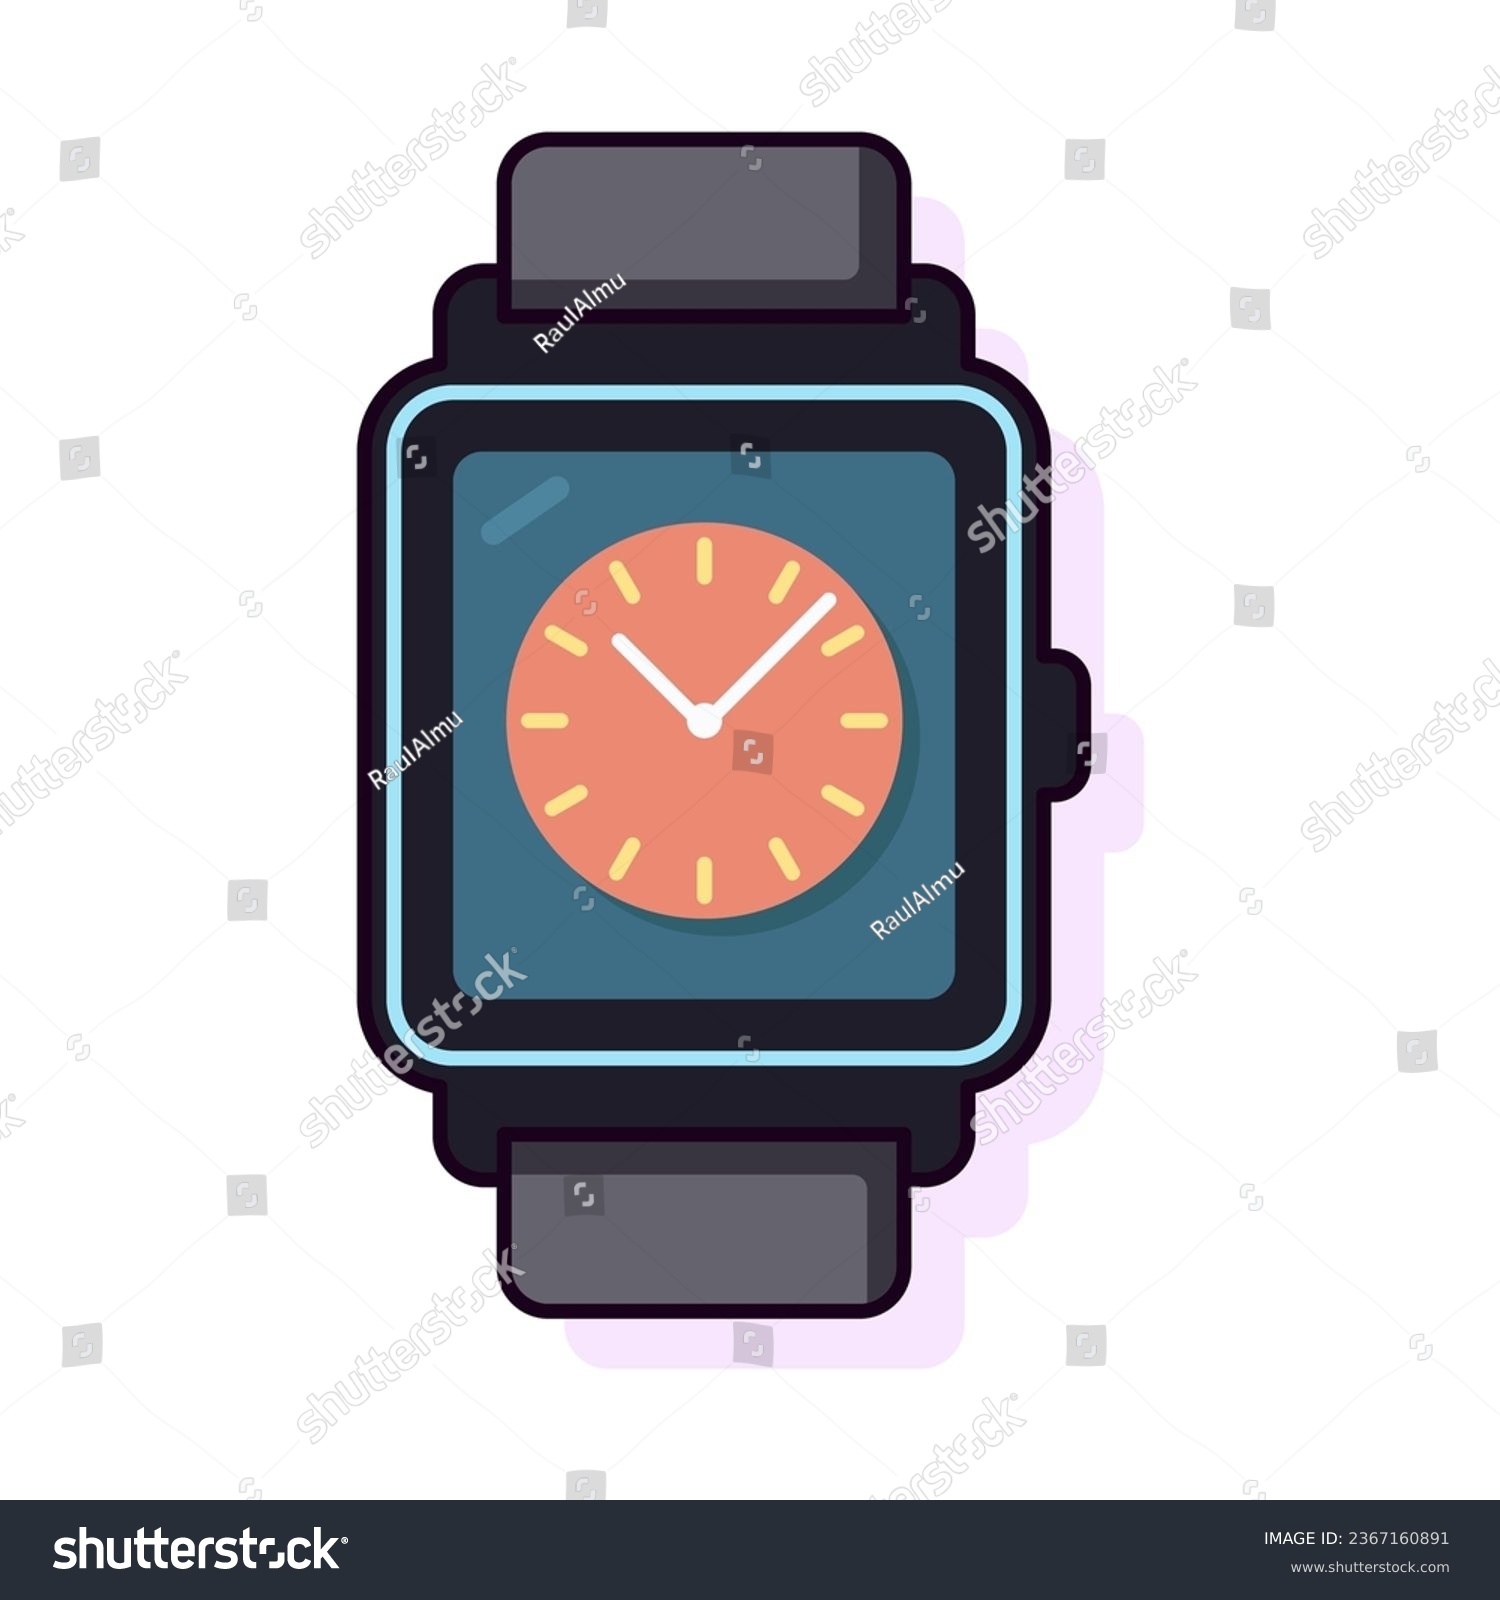 SVG of wristwatch, flat, illustration, time, clock, schedule, business, deadline, hour, minute, accessory, fashion, countdown, management, watch, icon, vector, isolated, wrist, modern, wristlet, dial, expens svg